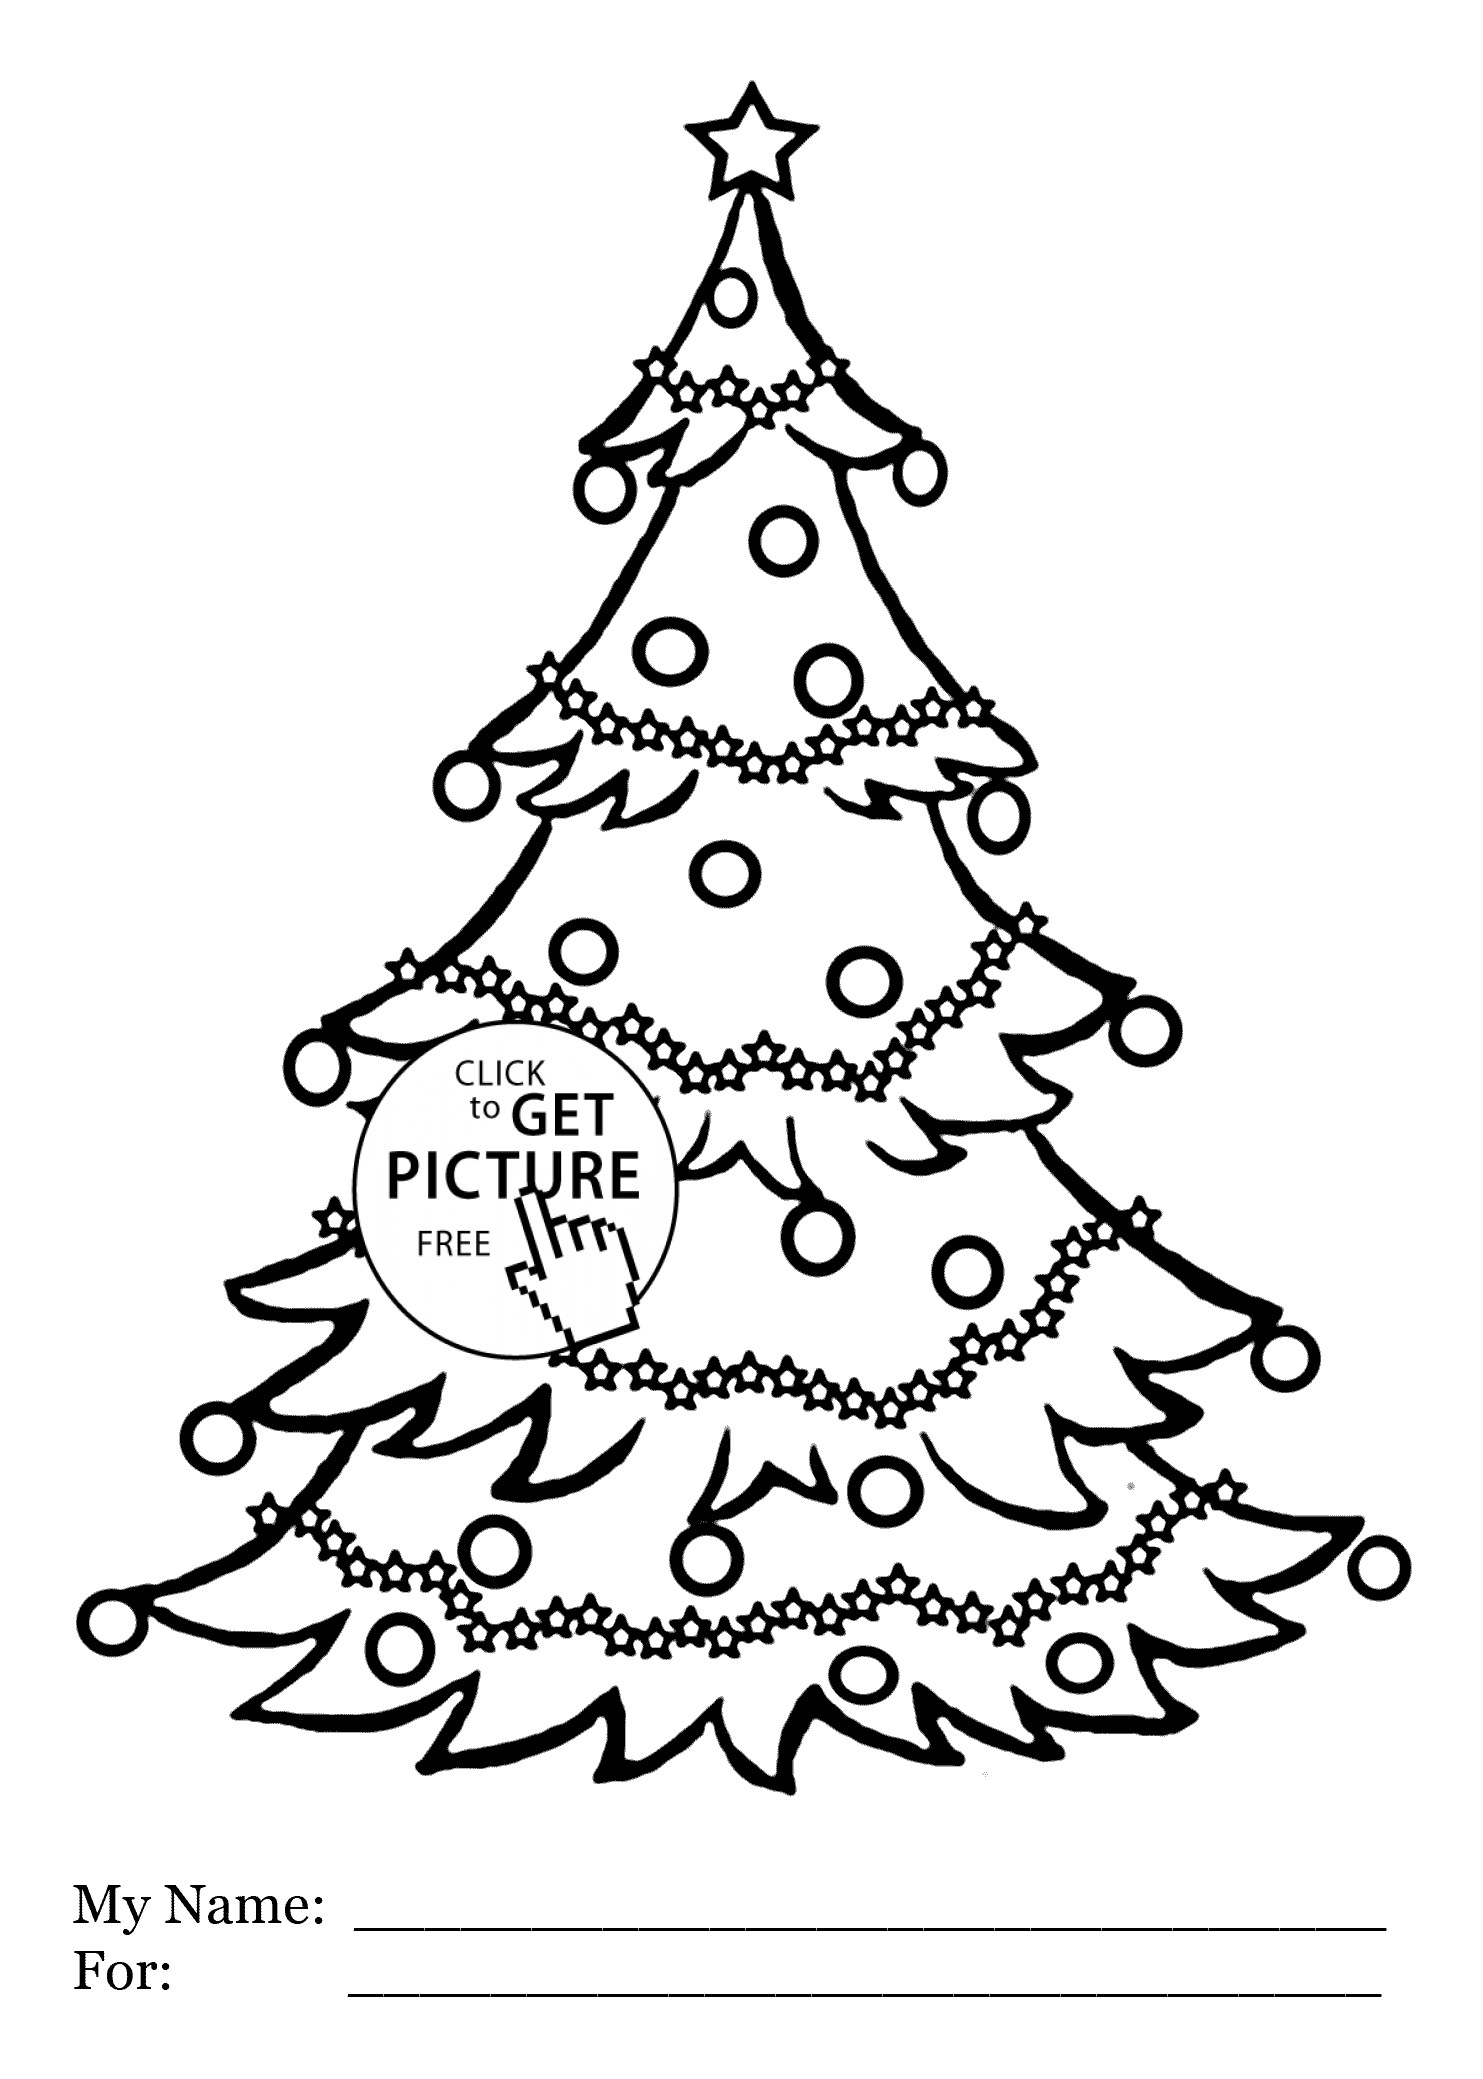 Christmas Tree Coloring Pages Free Printable at GetColorings.com | Free ...